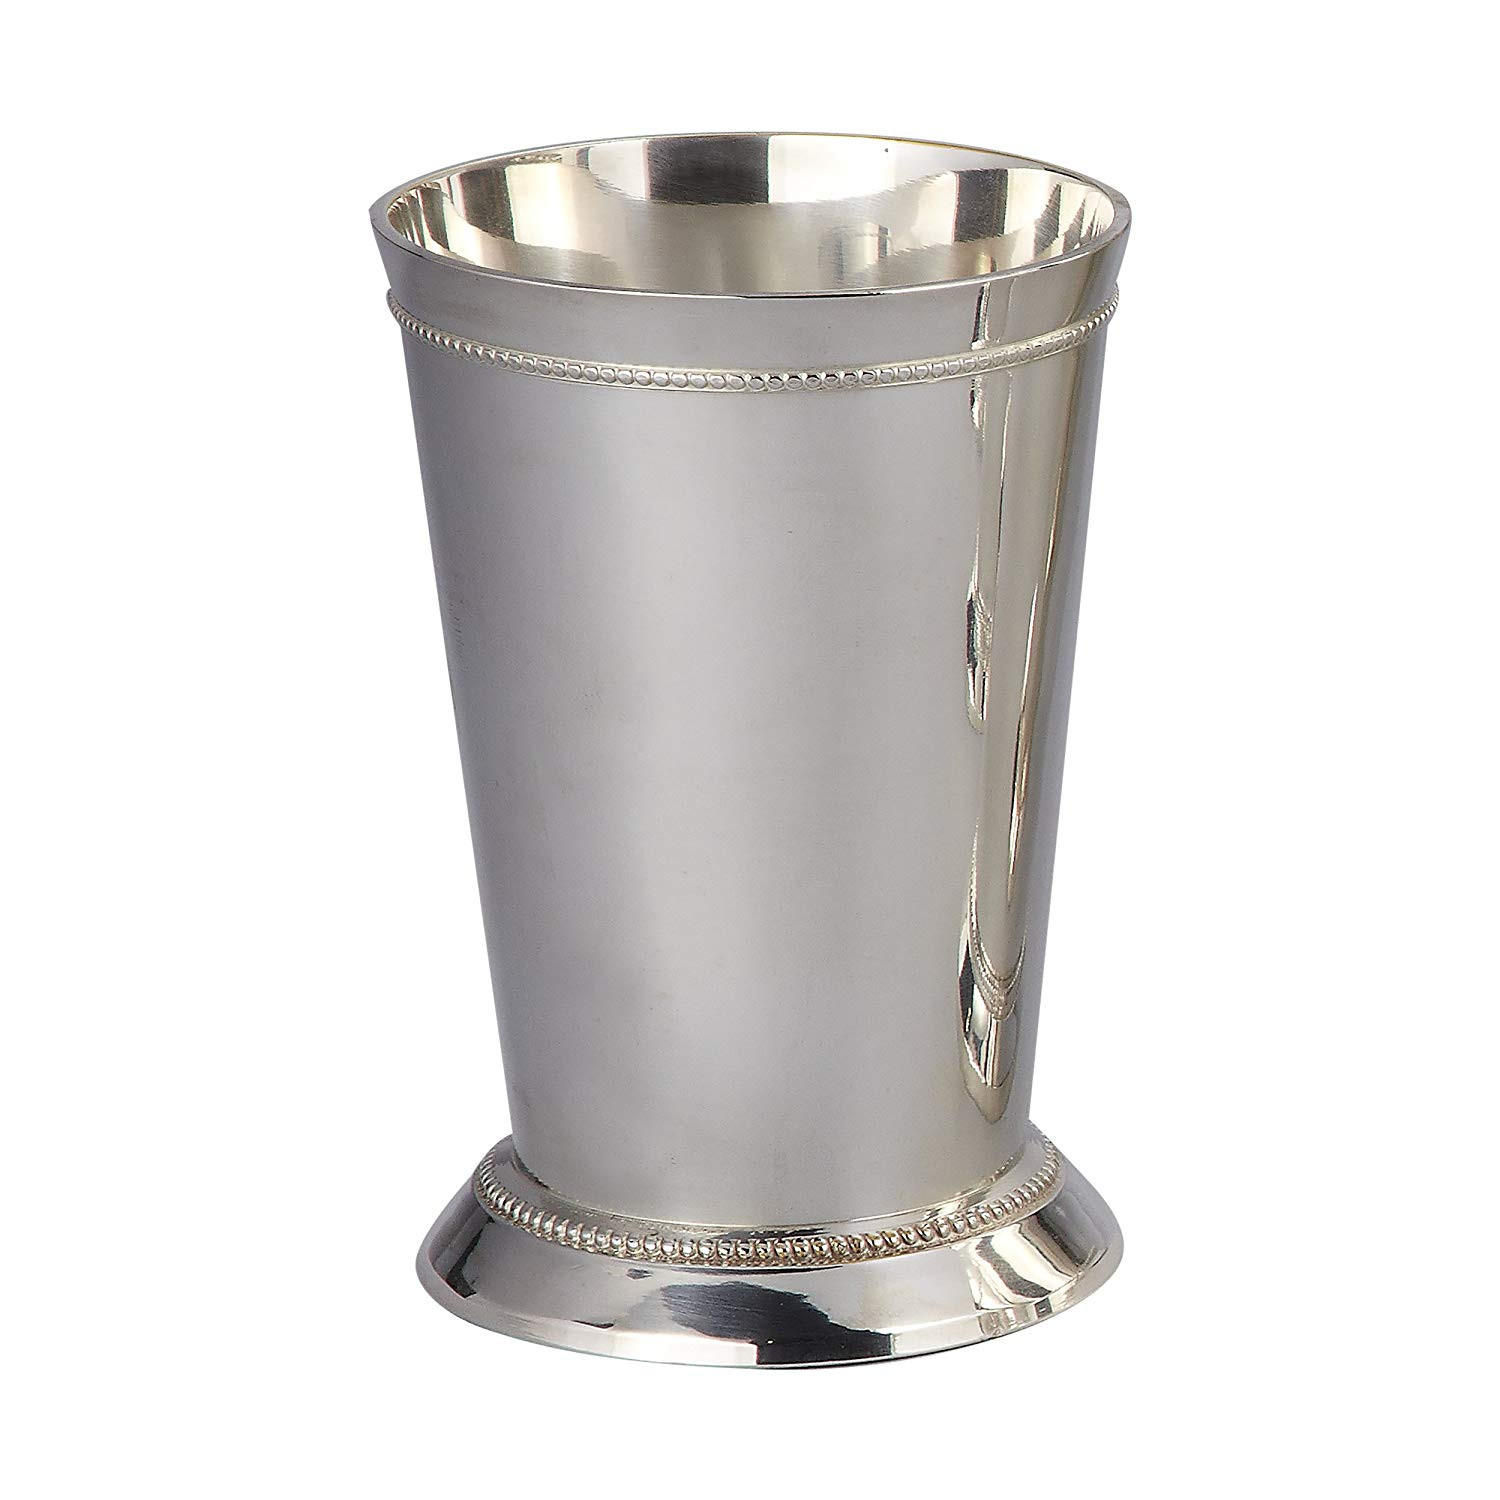 28 Unique Waterford Crystal Lismore Vase 2024 free download waterford crystal lismore vase of amazon com elegance silver silver plated beaded mint julep cup 12 pertaining to amazon com elegance silver silver plated beaded mint julep cup 12 oz set of 